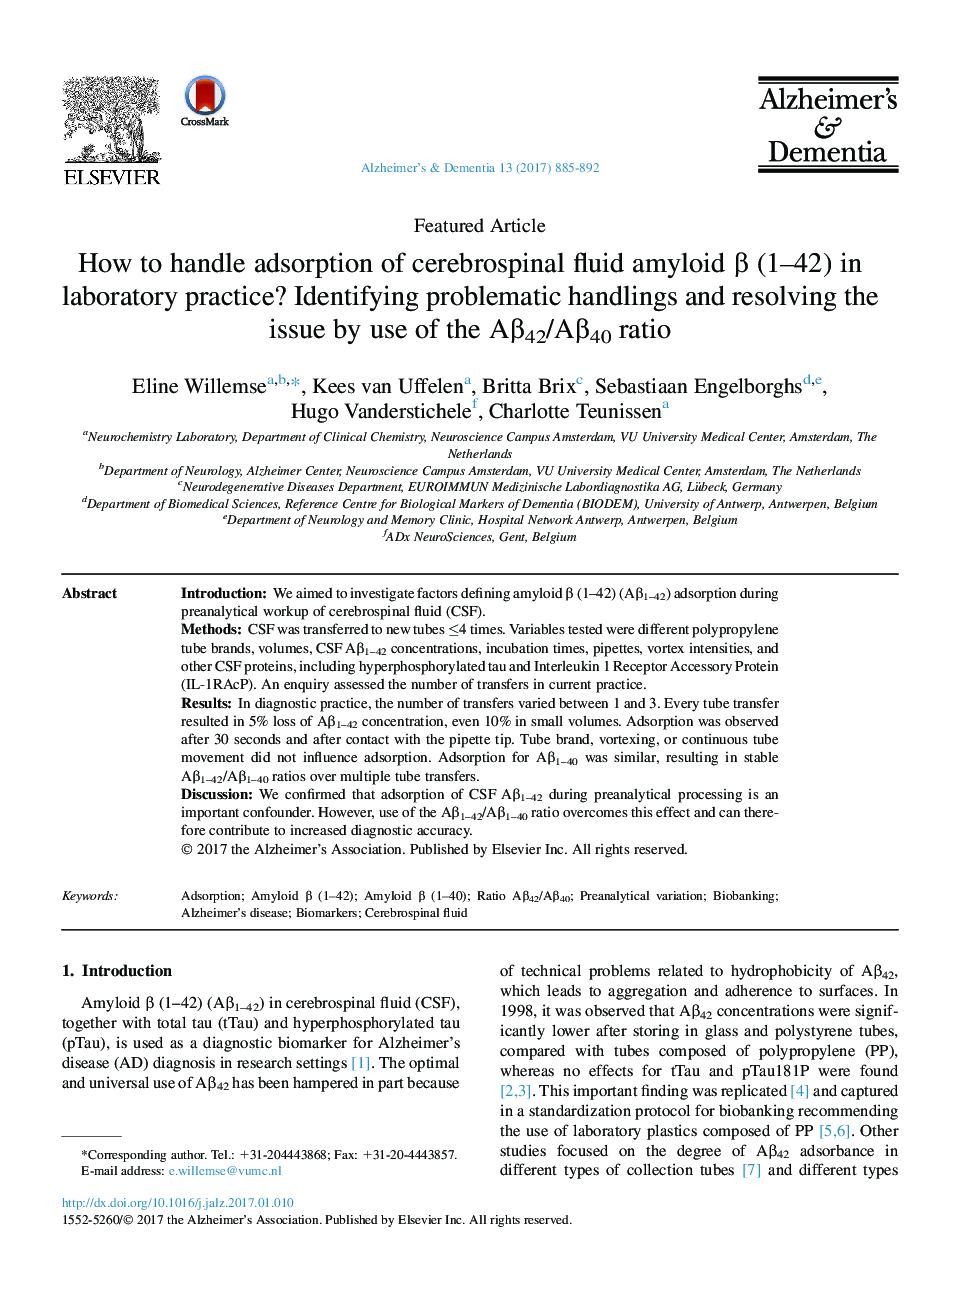 Featured ArticleHow to handle adsorption of cerebrospinal fluid amyloid Î² (1-42) in laboratory practice? Identifying problematic handlings and resolving the issue by use of the AÎ²42/AÎ²40 ratio